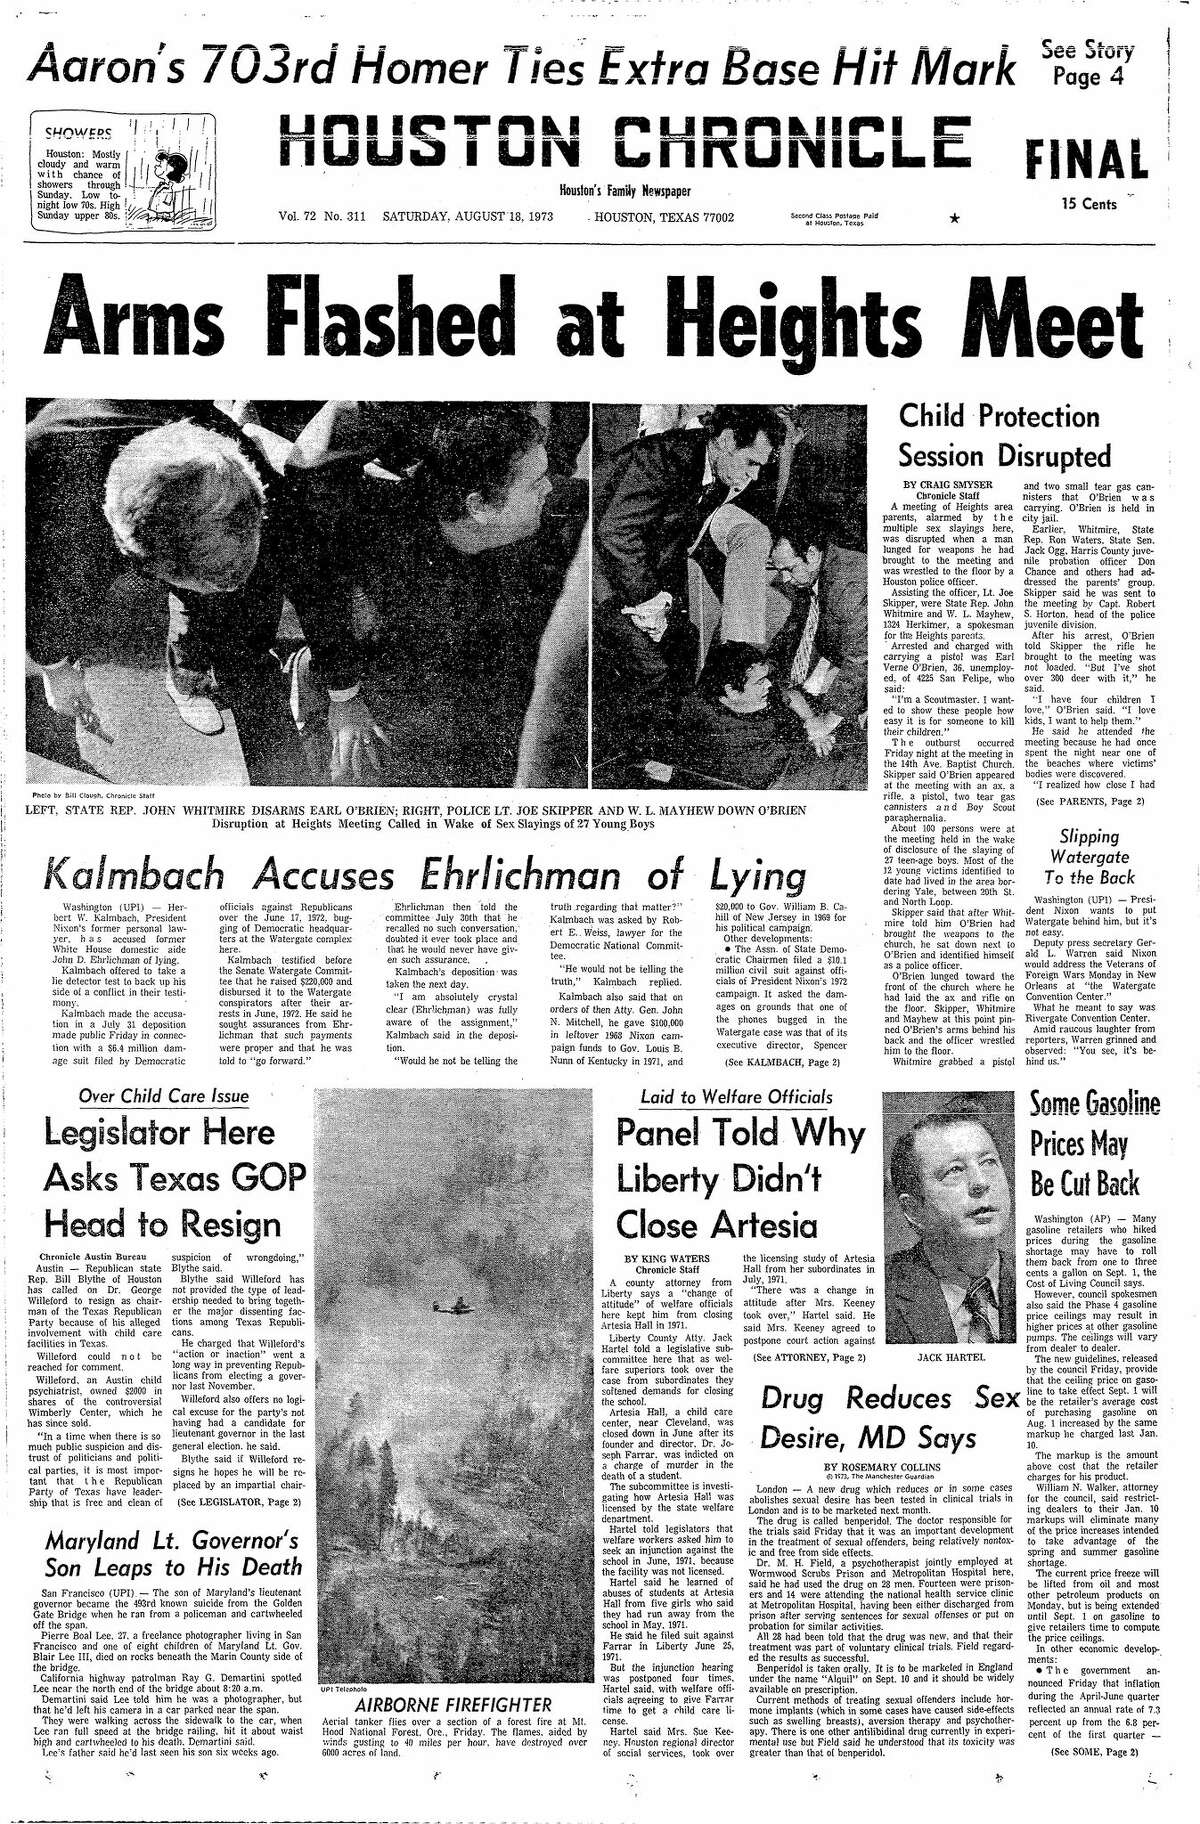 Houston Chronicle front page for Aug. 18, 1973.